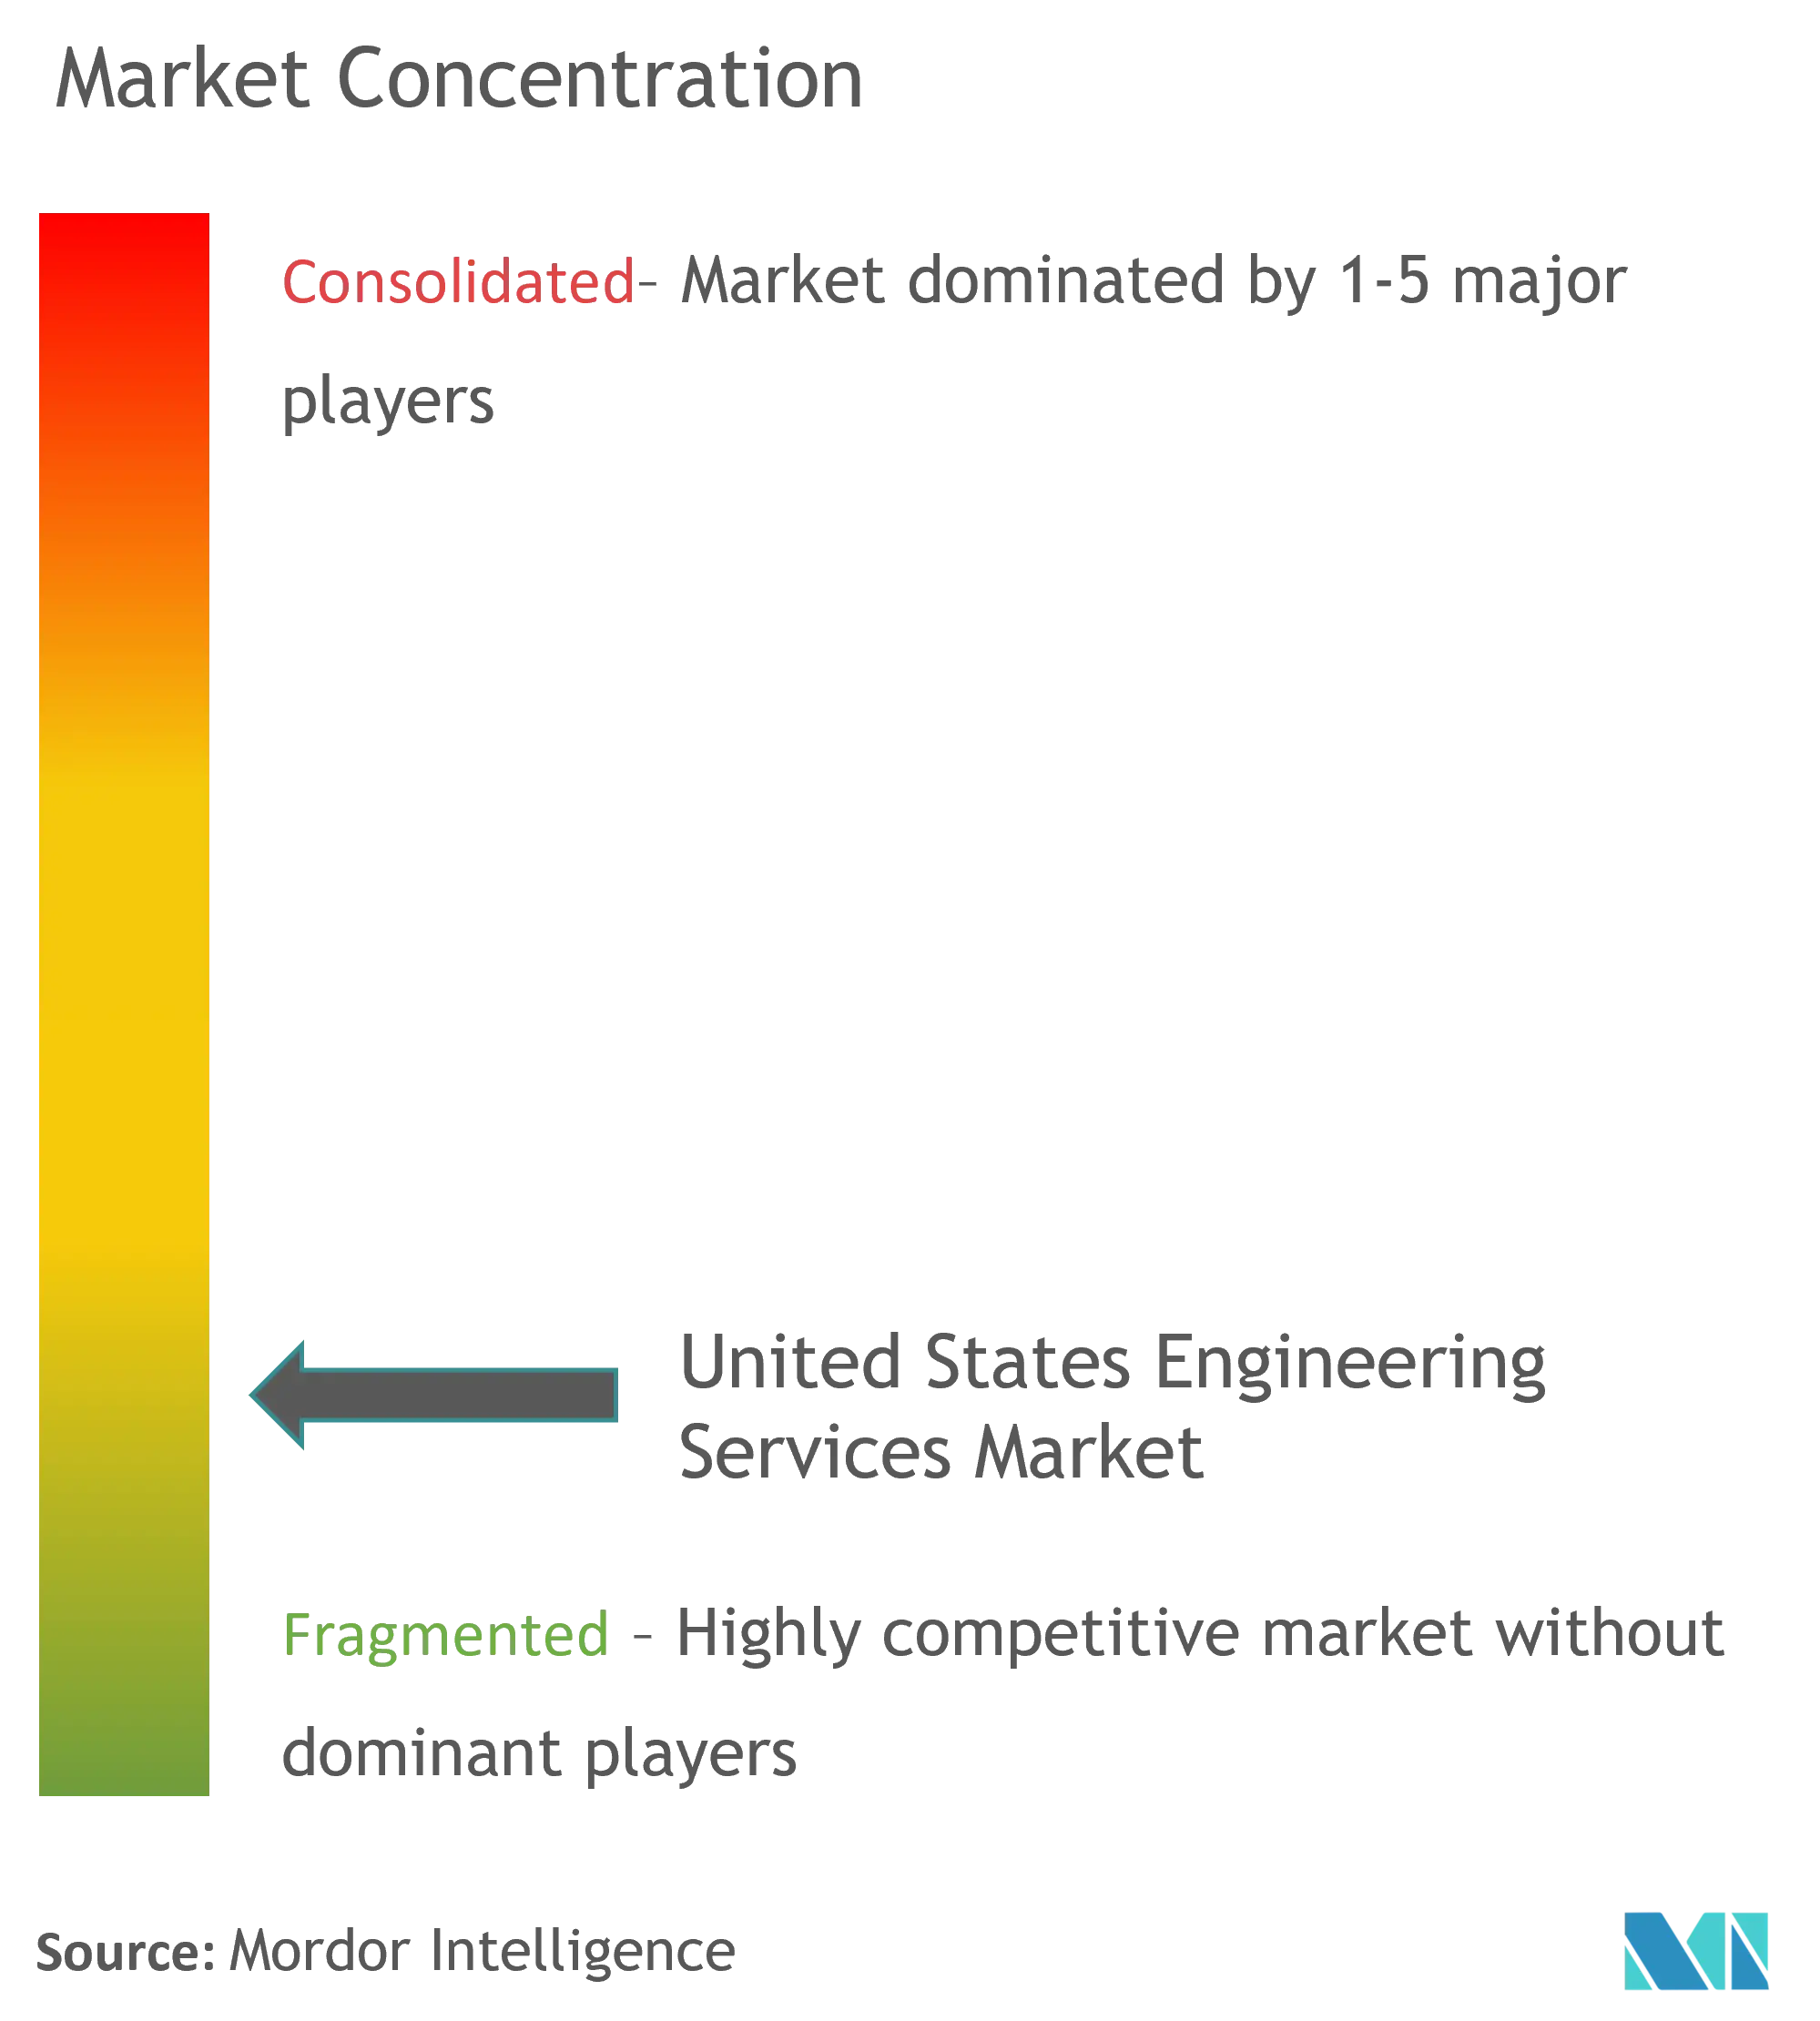 United States Engineering Services Market Concentration